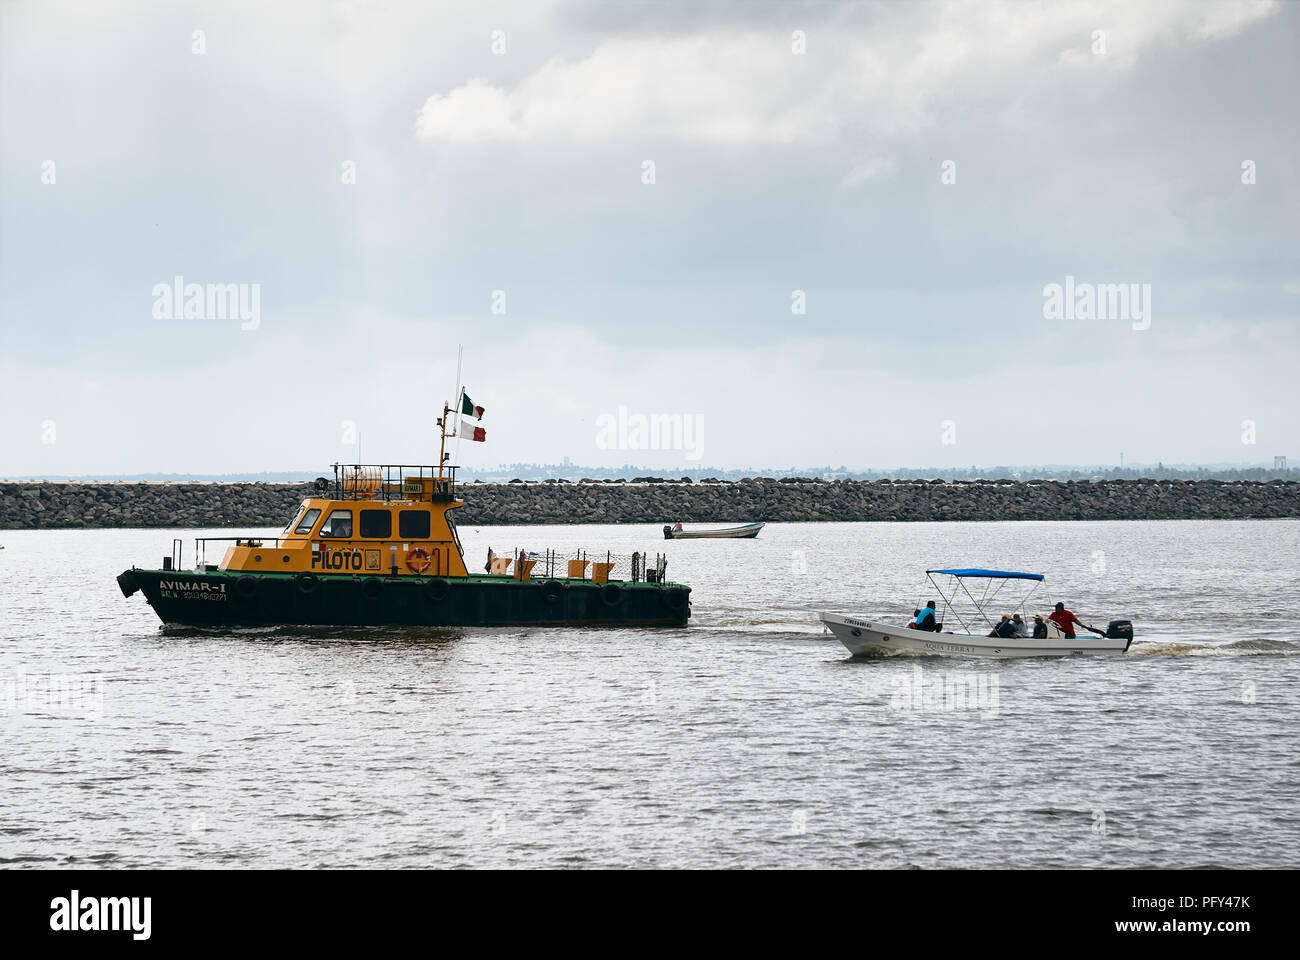 COATZACOALCOS, VER/MEXICO - AUG 18, 2018: A maritime pilot ship, Avimar-1, at the breakwaters on the river mouth. A water taxi and a fishing boat Stock Photo